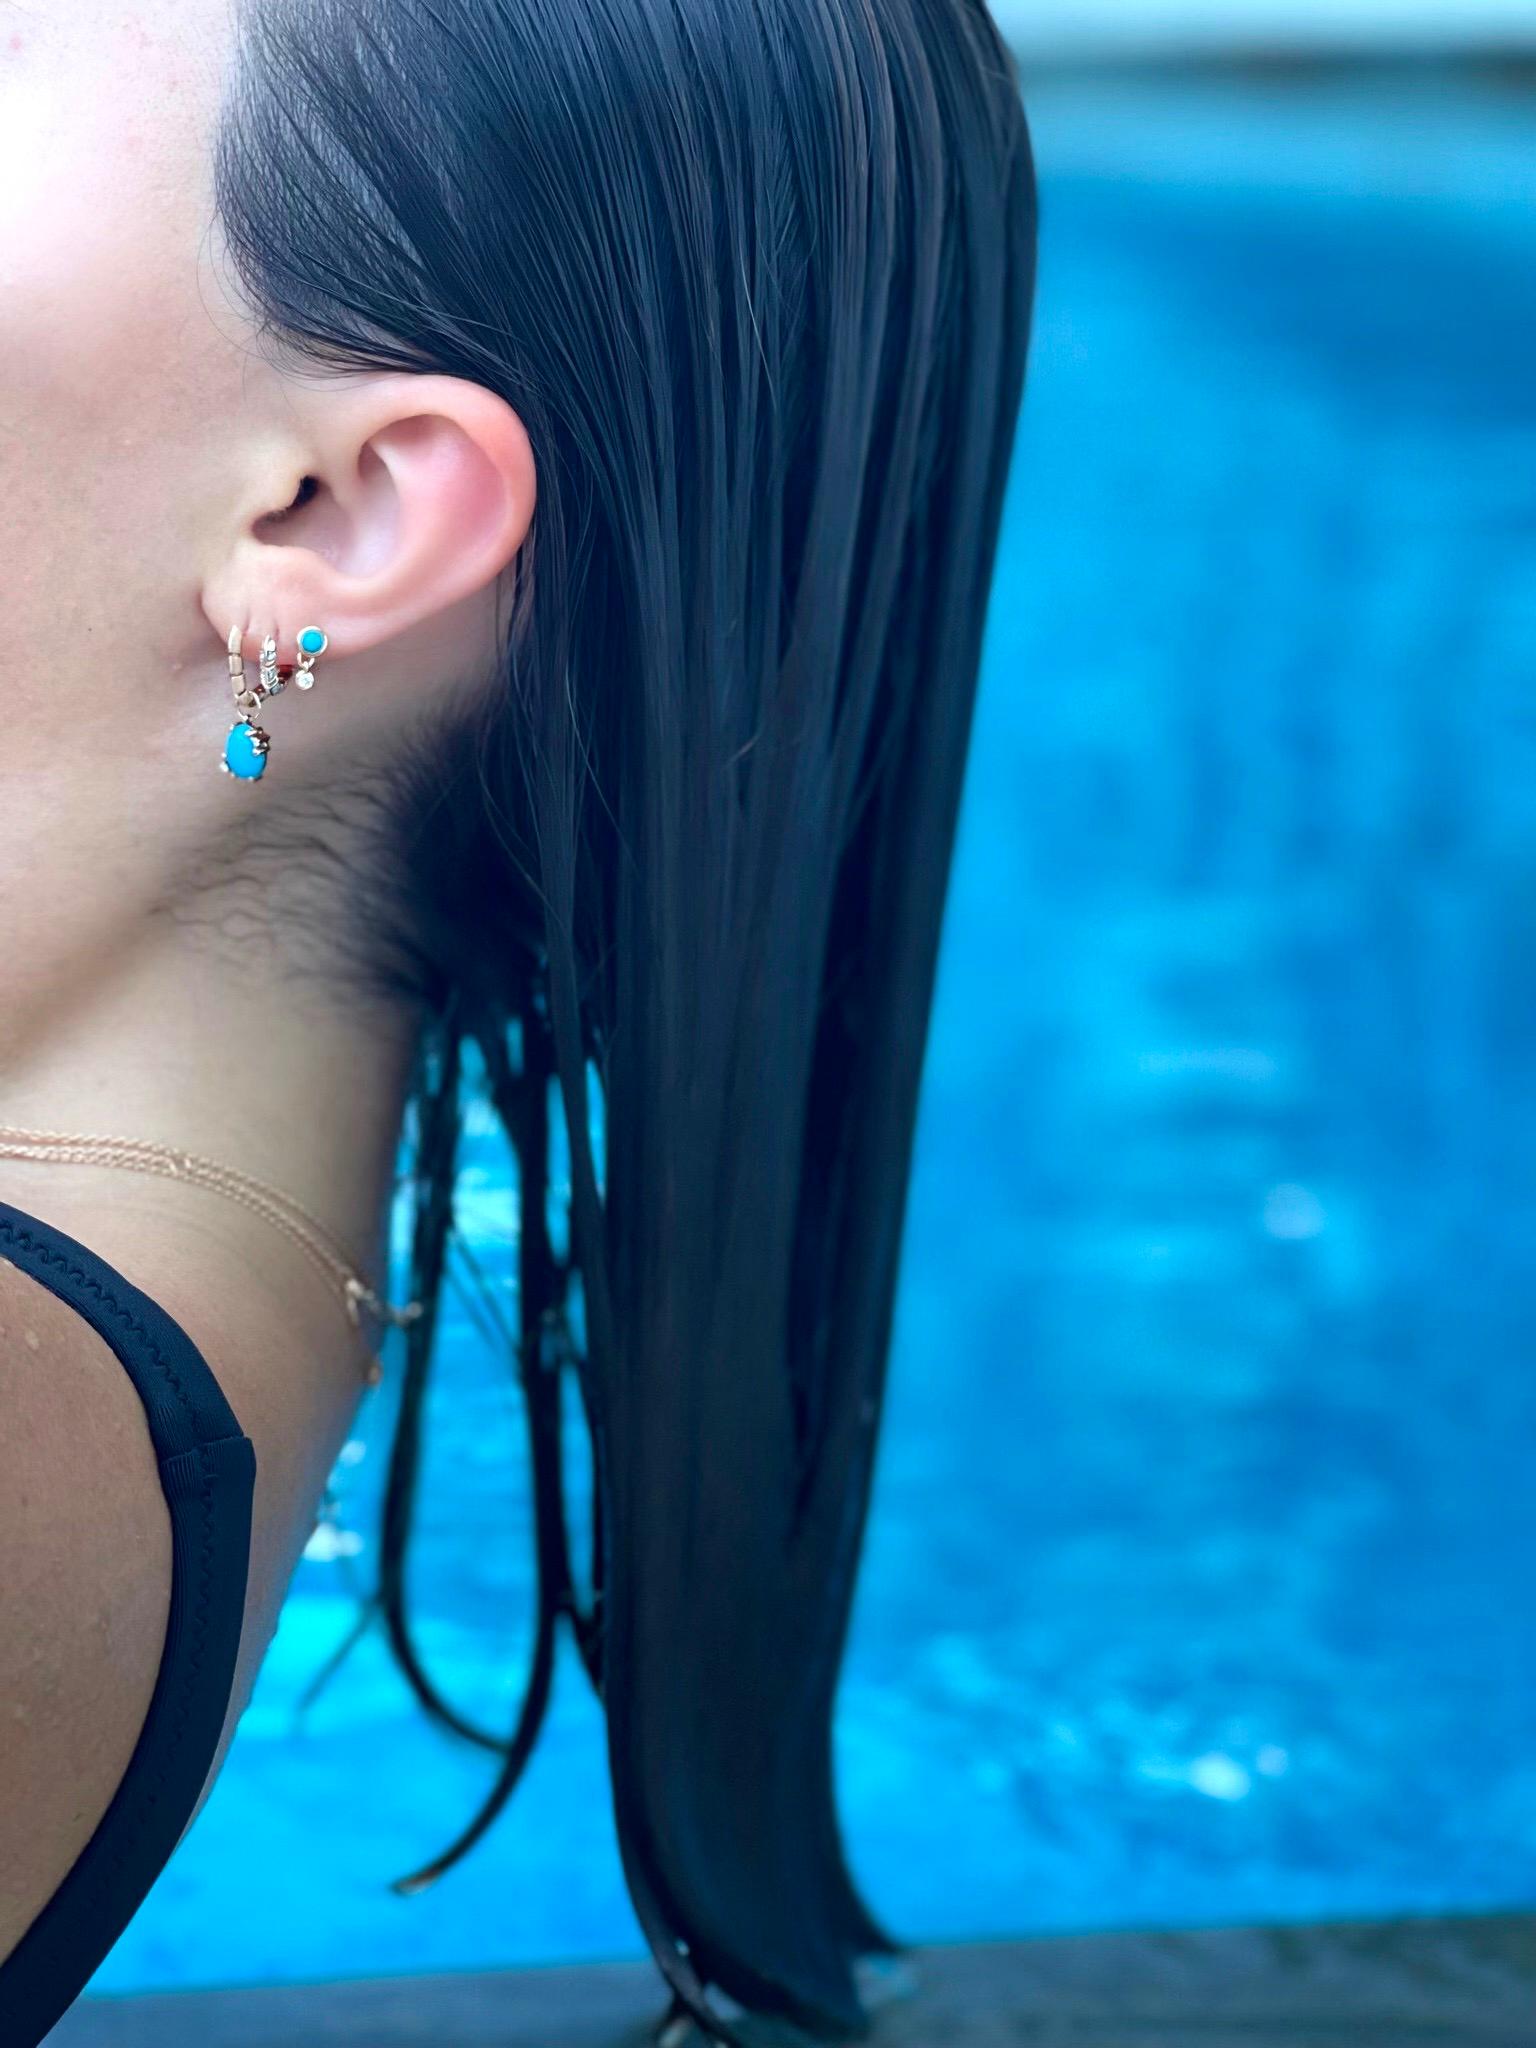 The Treasures of The Sea Collection is inspired by the water element which represents the treasures and natural stones hidden in the depths of the sea.

Cassiopeia Dangle Small Earrings in Rose Gold with Turquoise and White Diamond by Selda